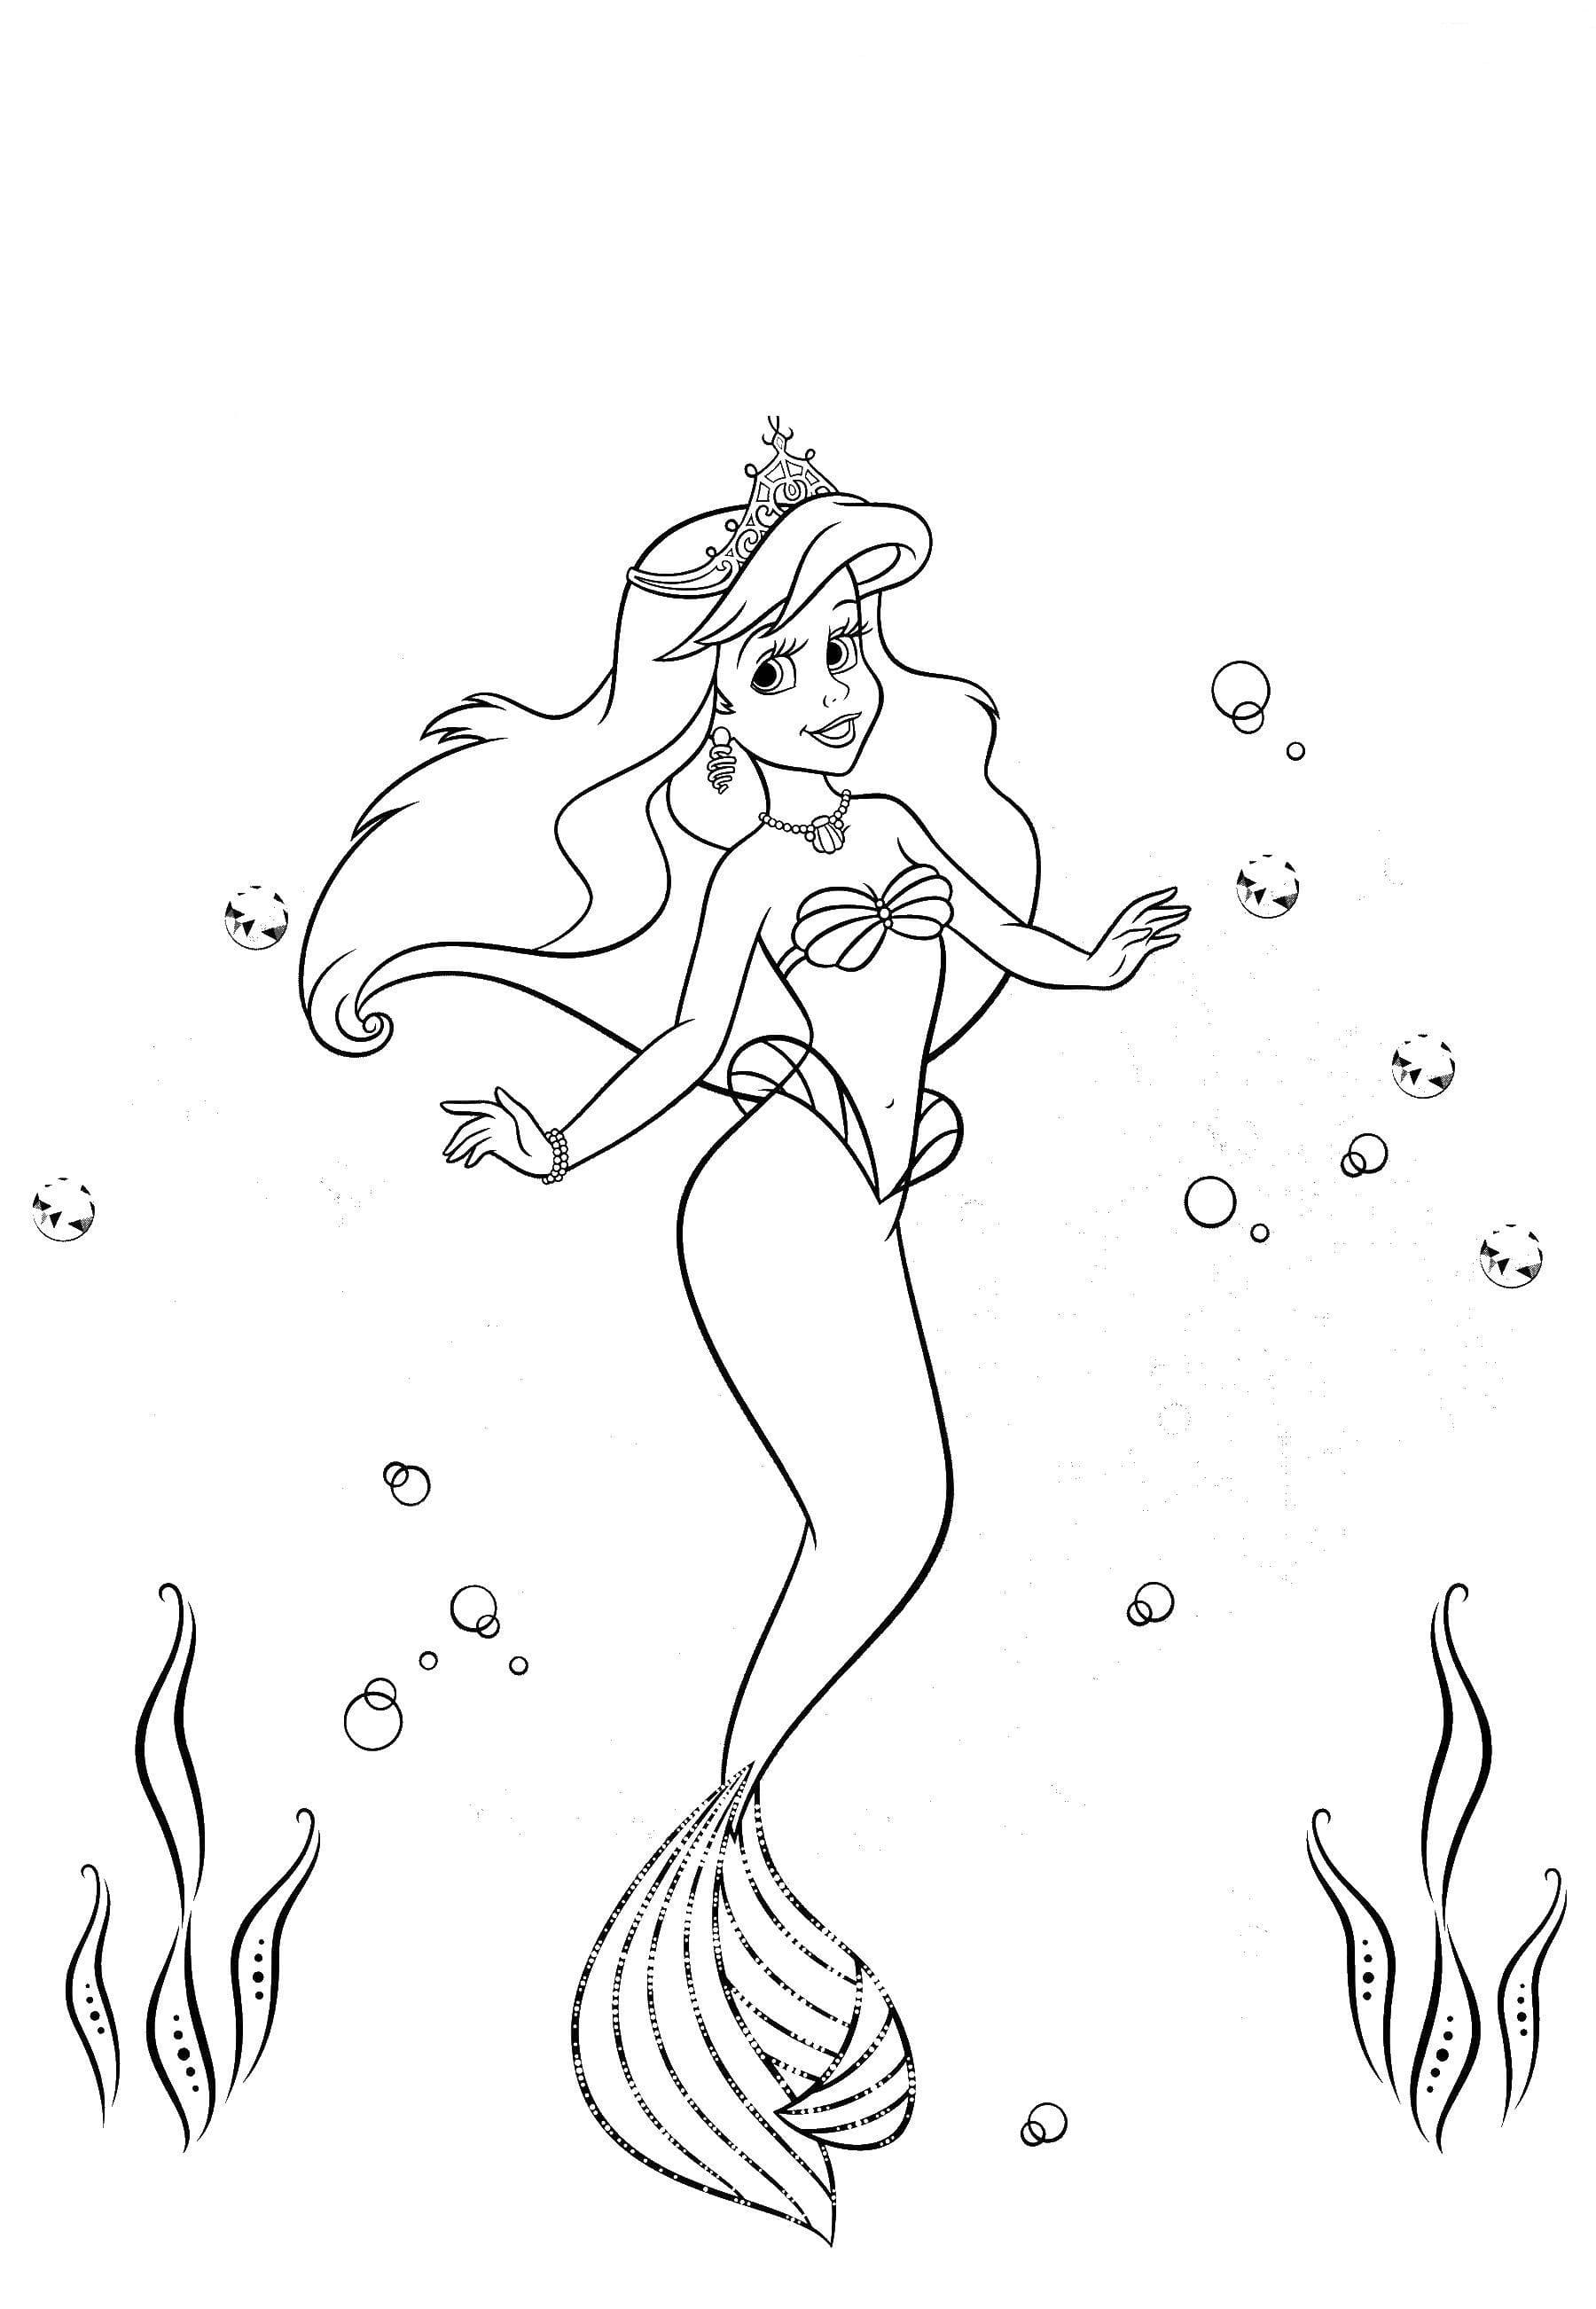 Ariel 21 from The Little Mermaid coloring page to print and coloring